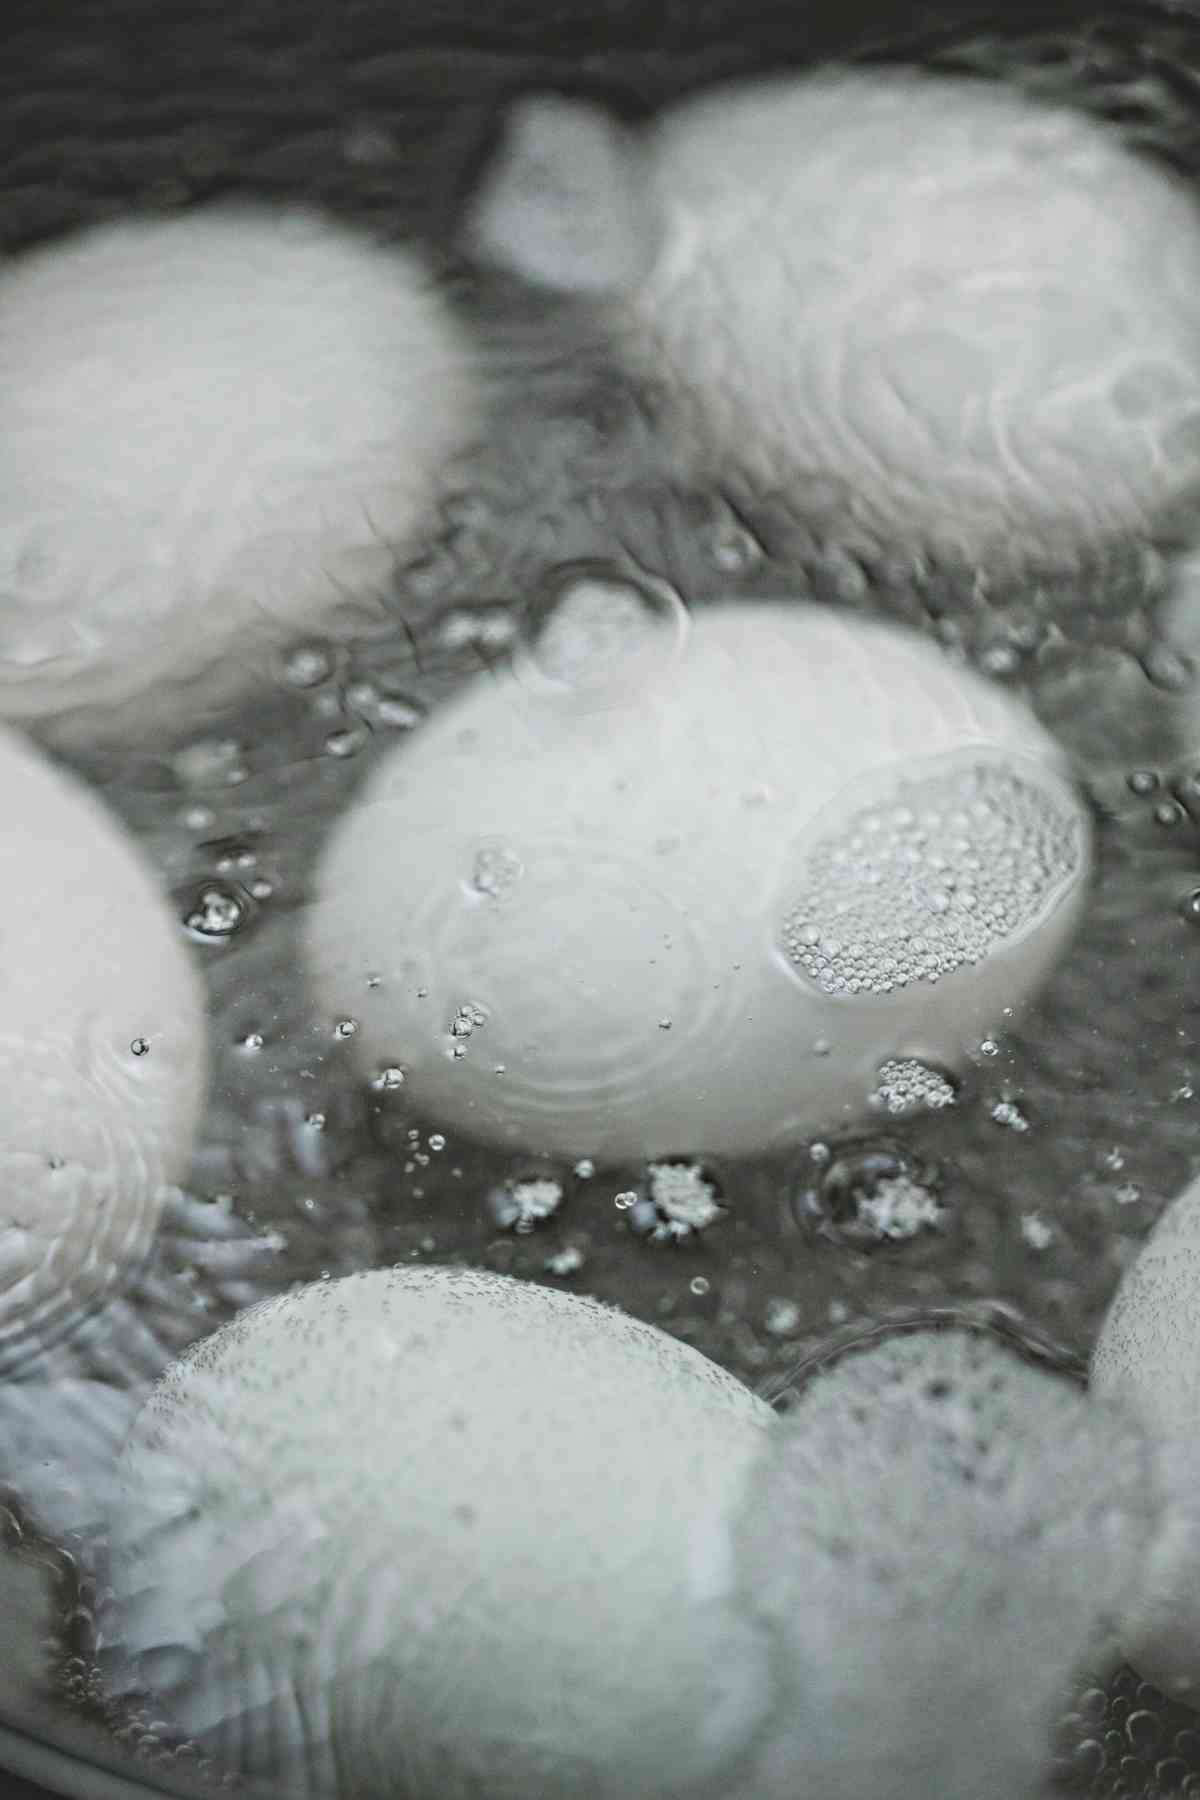 Eggs in boiling water